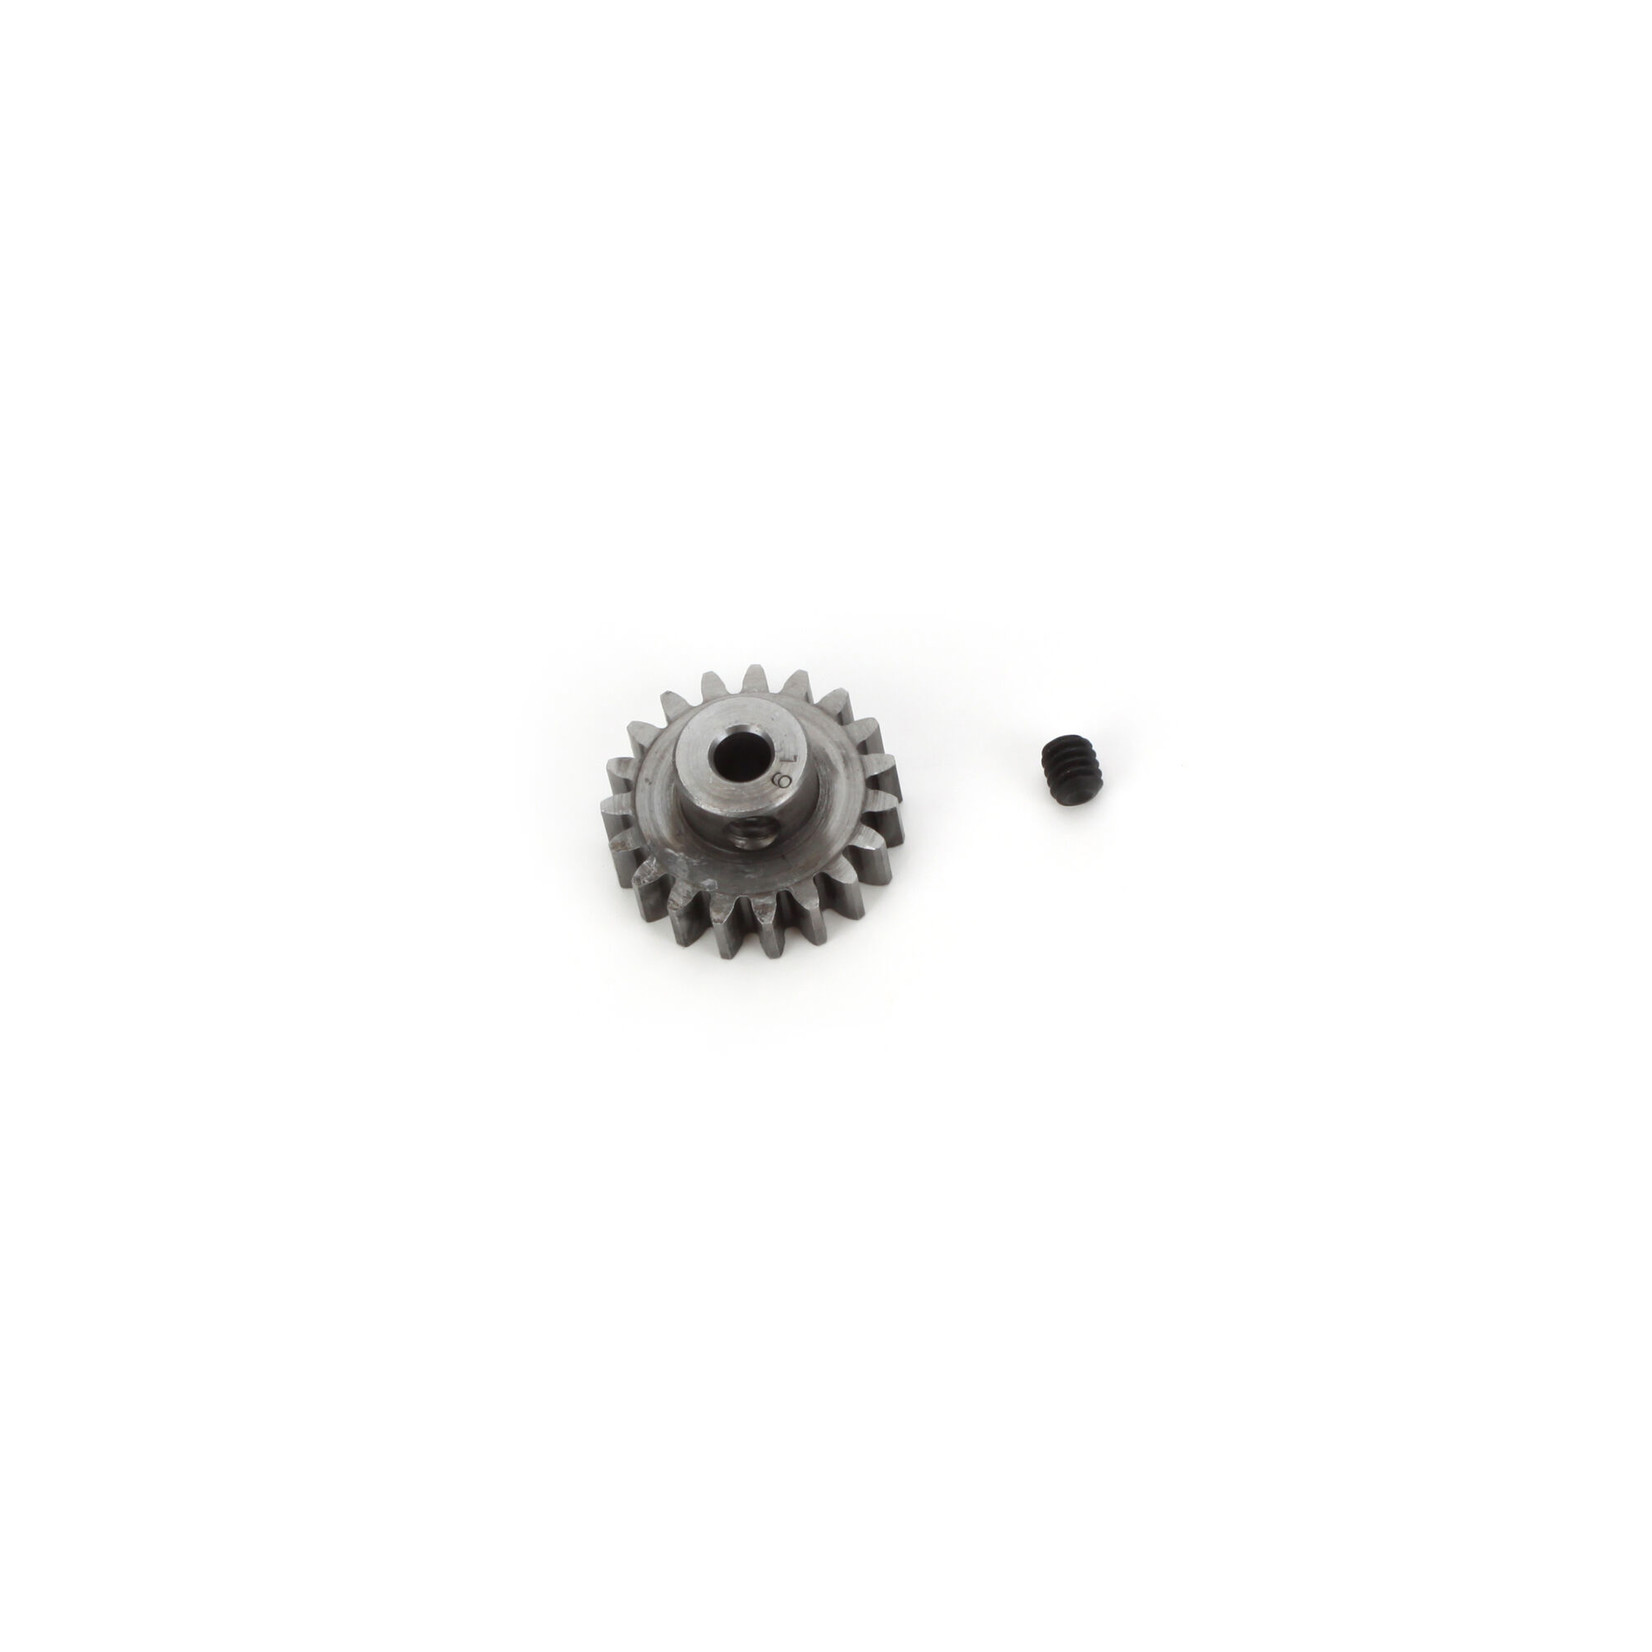 Robinson Racing Products (RRP) Hardened 32P Absolute Pinion, 19T